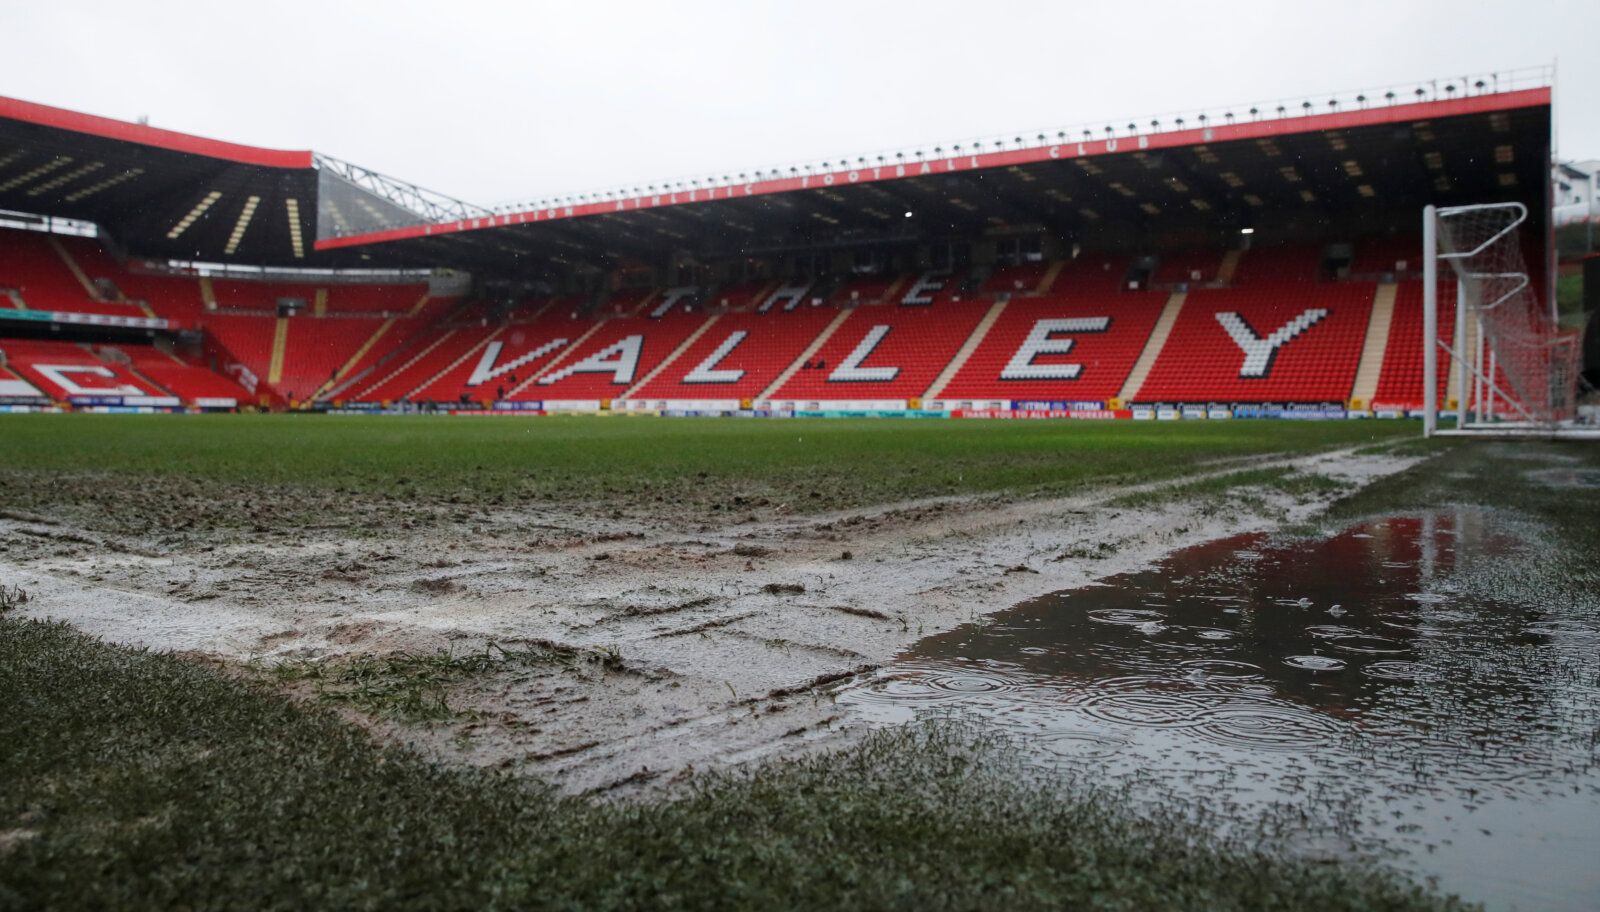 Soccer Football - League One - Charlton Athletic v Portsmouth - The Valley, London, Britain - January 30, 2021  General view of the pitch at The Valley as the game is called off because of a waterlogged pitch  Action Images/Andrew Couldridge  EDITORIAL USE ONLY. No use with unauthorized audio, video, data, fixture lists, club/league logos or "live" services. Online in-match use limited to 75 images, no video emulation. No use in betting, games or single club/league/player publications.  Please c